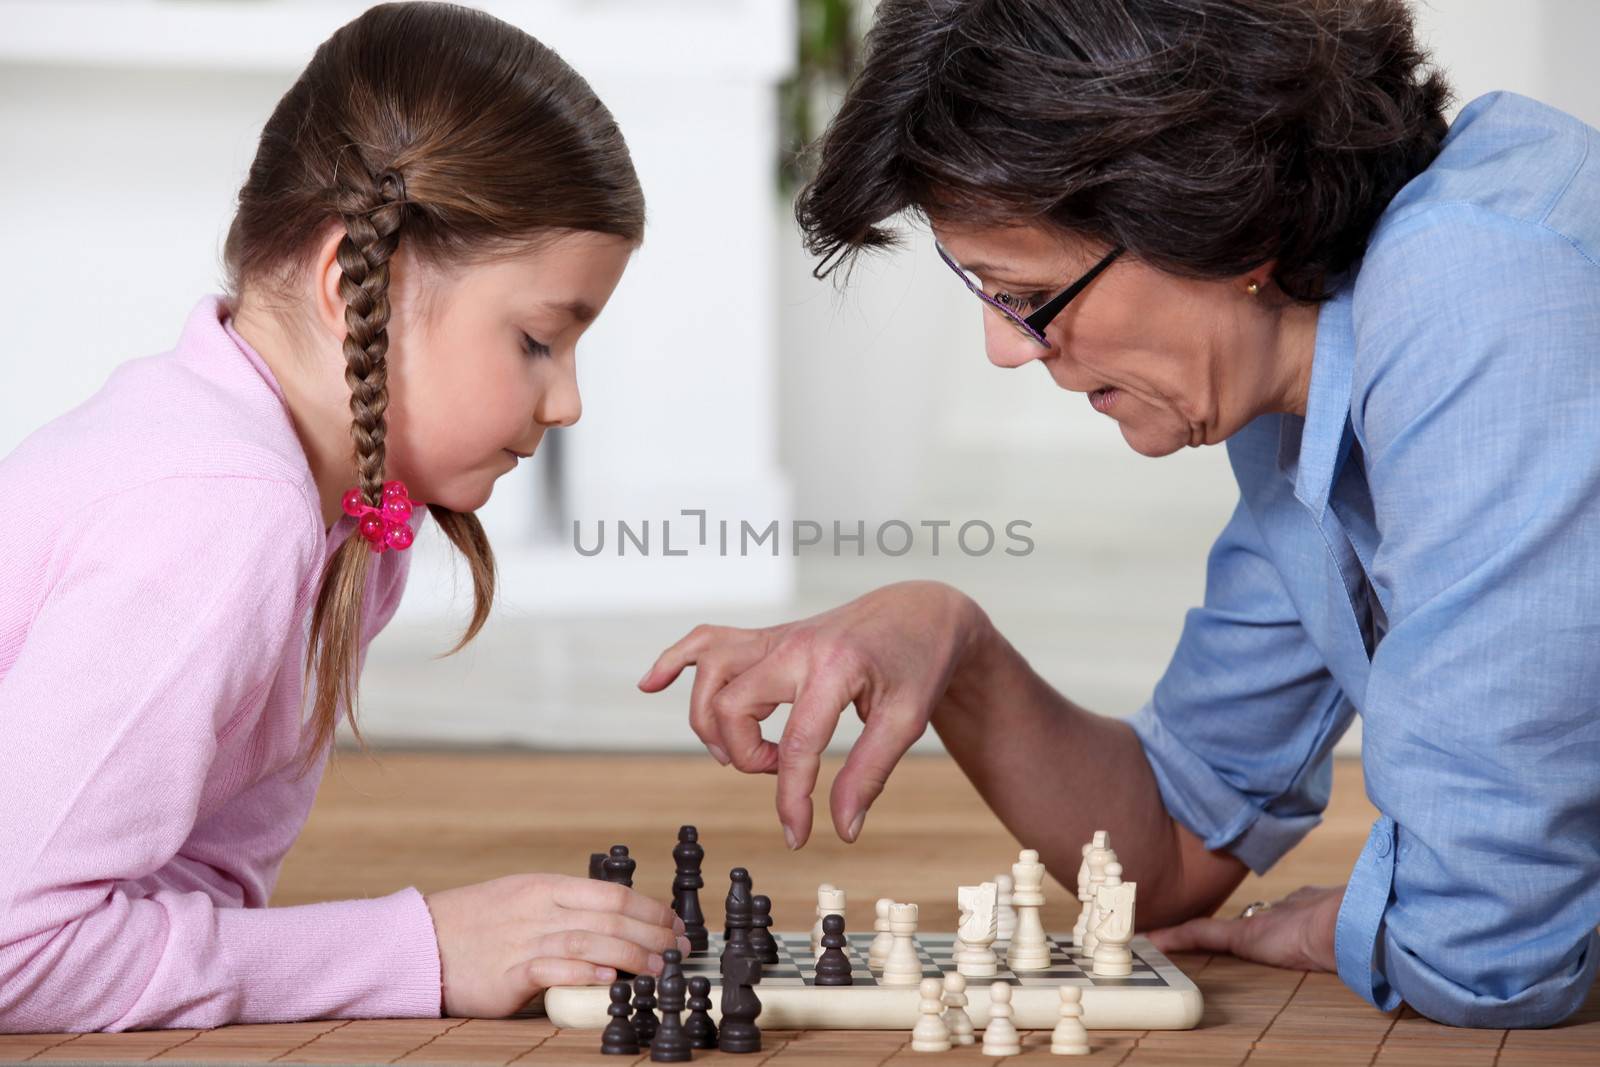 Playing chess with grandma by phovoir